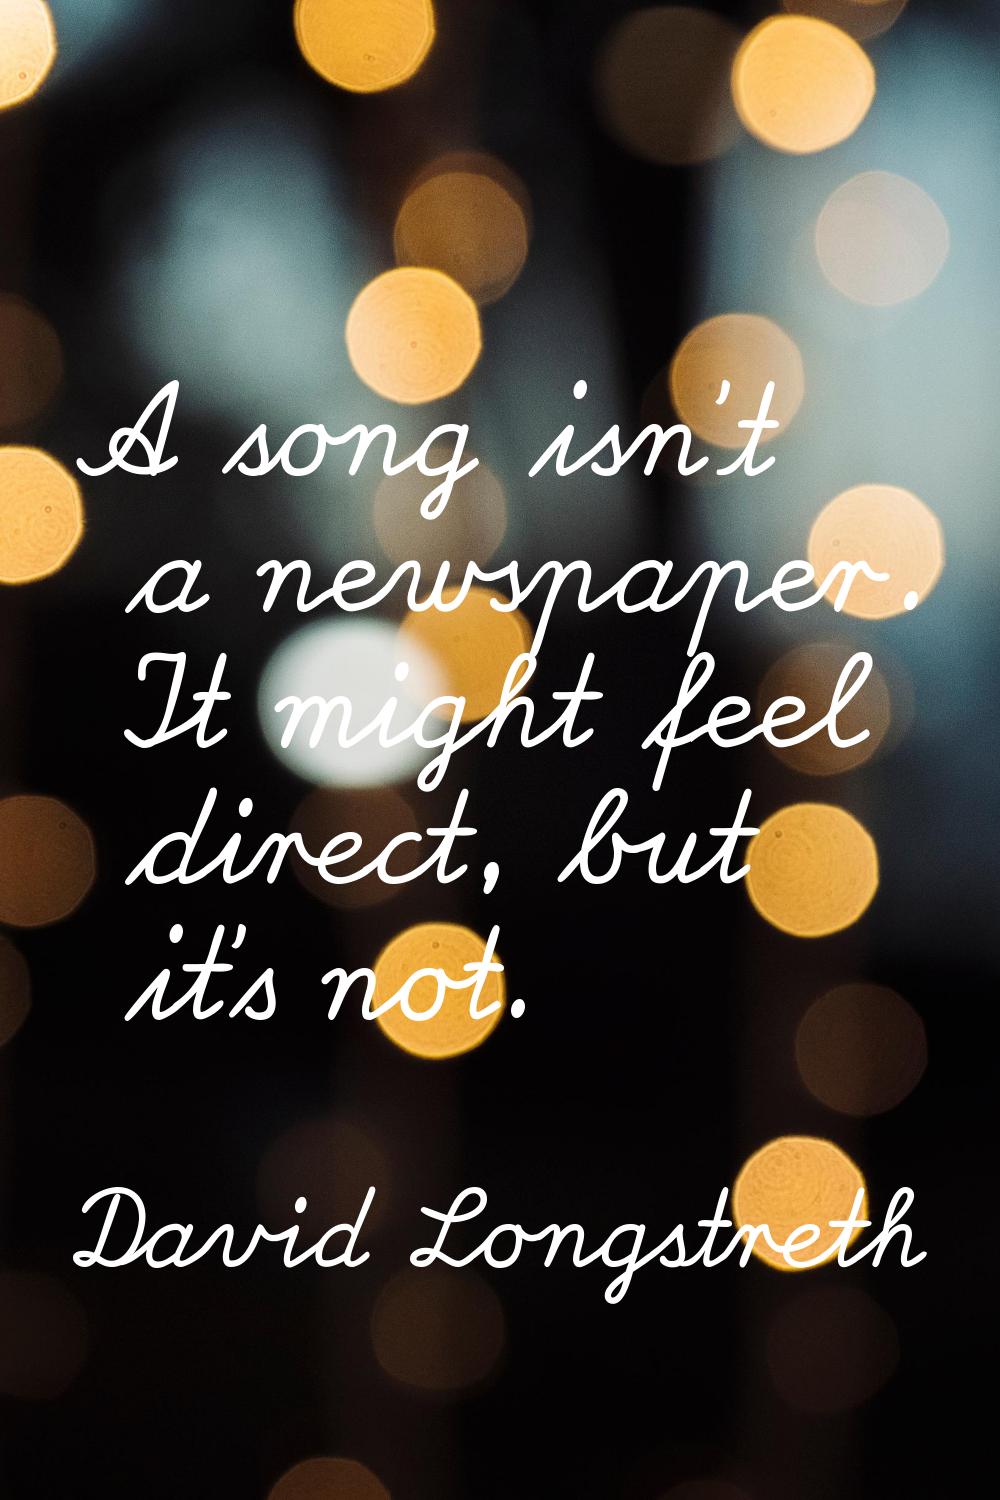 A song isn't a newspaper. It might feel direct, but it's not.